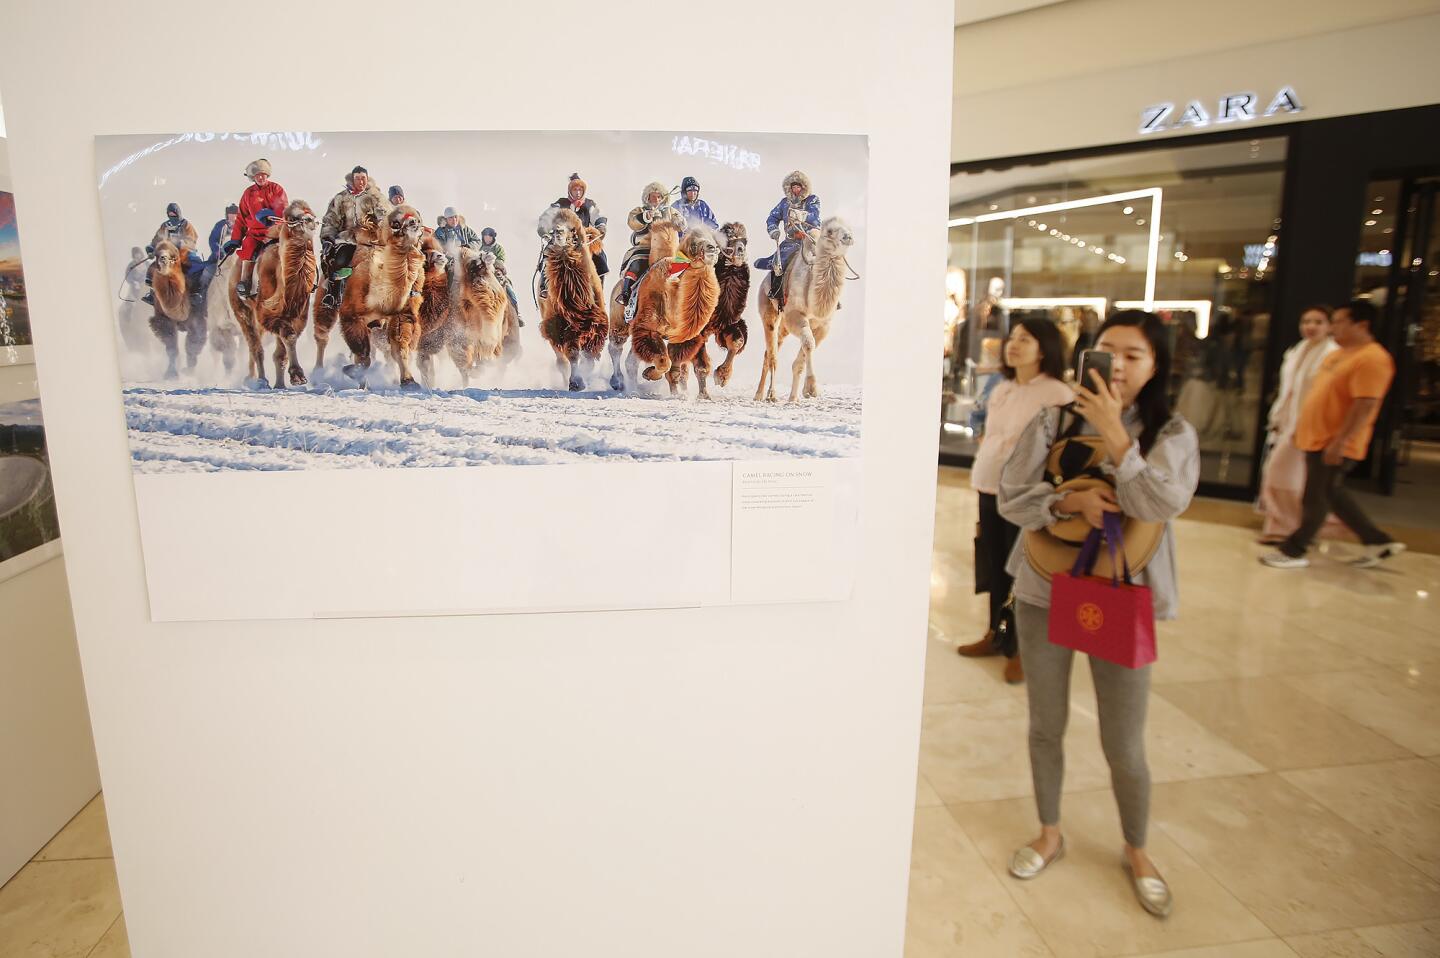 "China Story," a photo exhibit featuring cultural, natural and historic images of China, is part of the Autumn Harvest Festival at South Coast Plaza in Costa Mesa through Sunday.